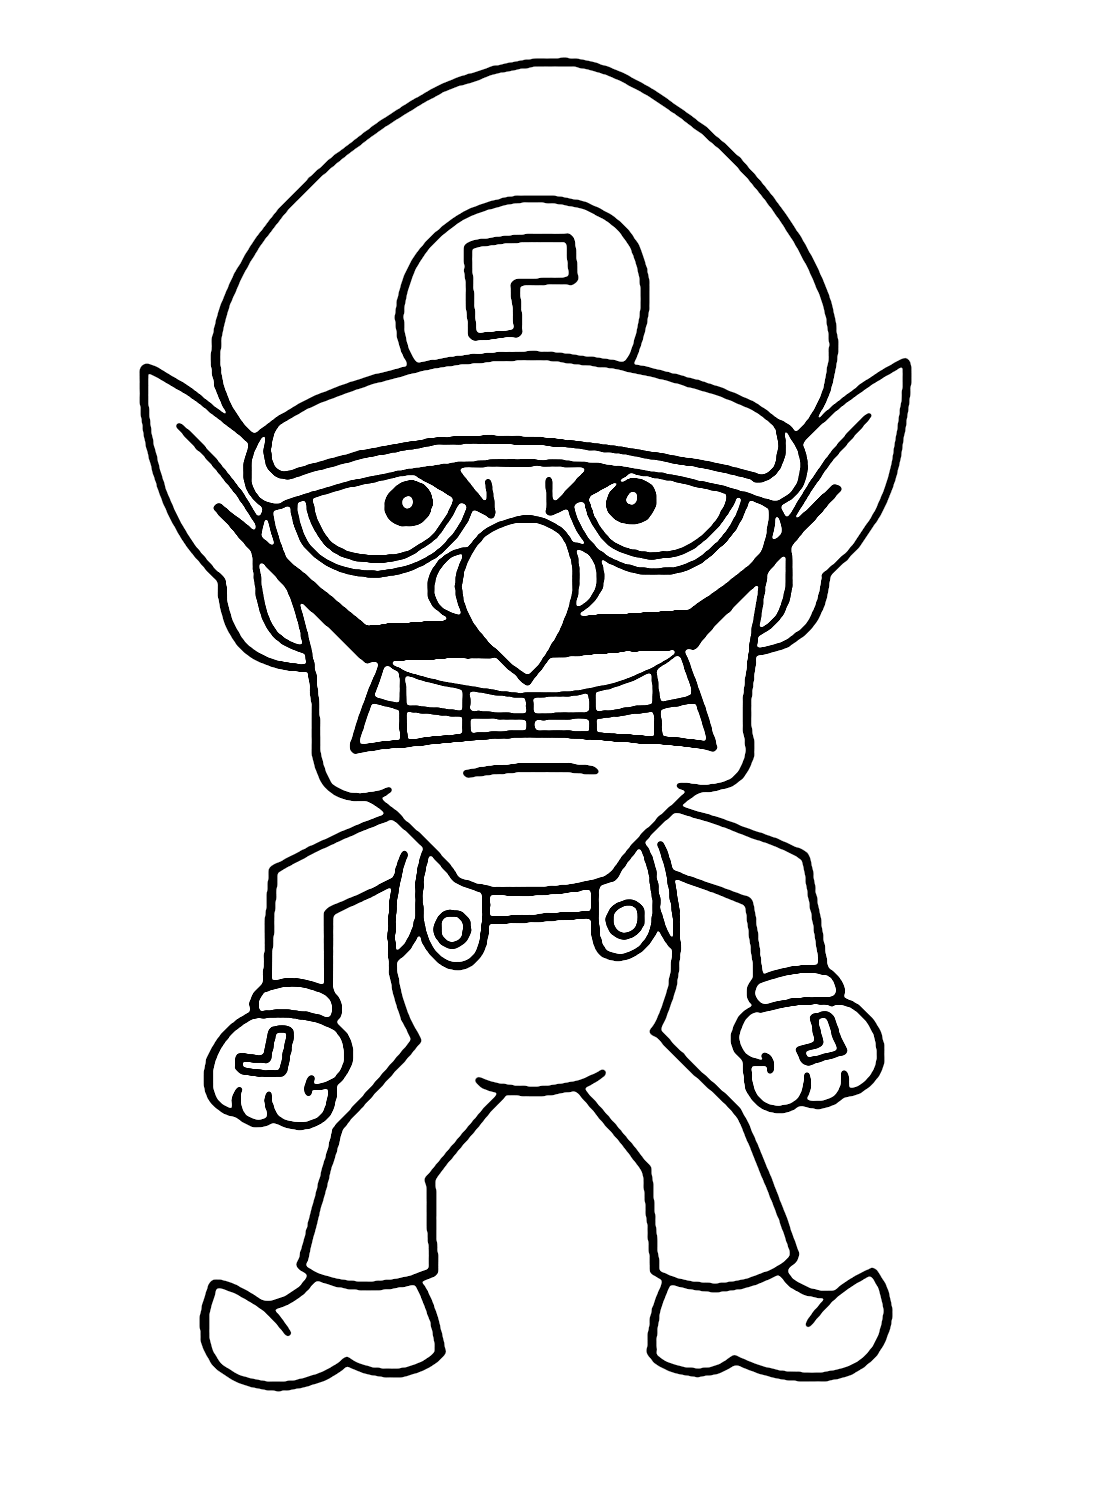 Waluigi Coloring Pages - Coloring Pages For Kids And Adults